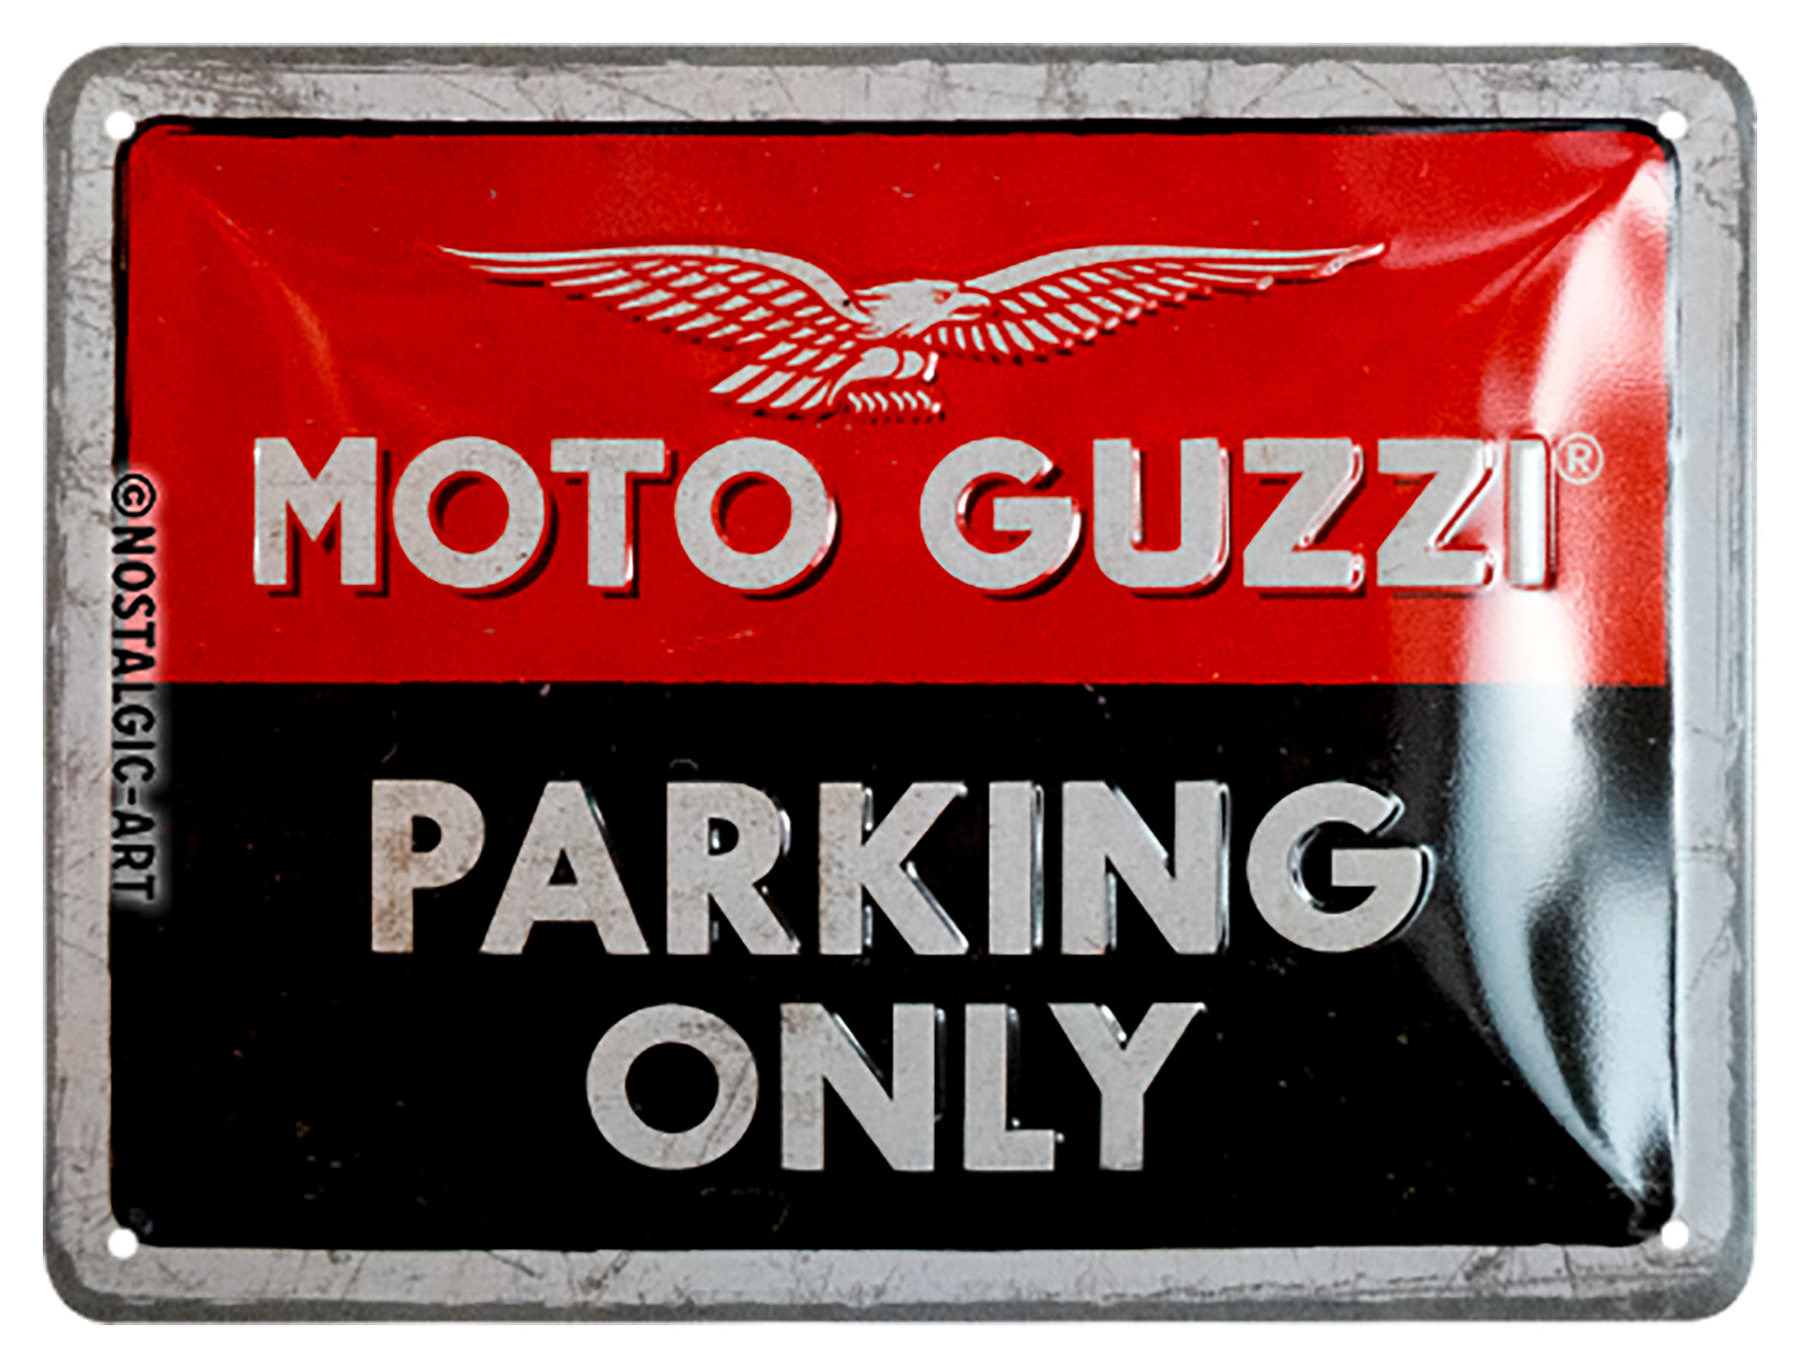 MOTORCYCLE Parking Only Street Sign Heavy Duty Aluminum Sign 9" x 12" 